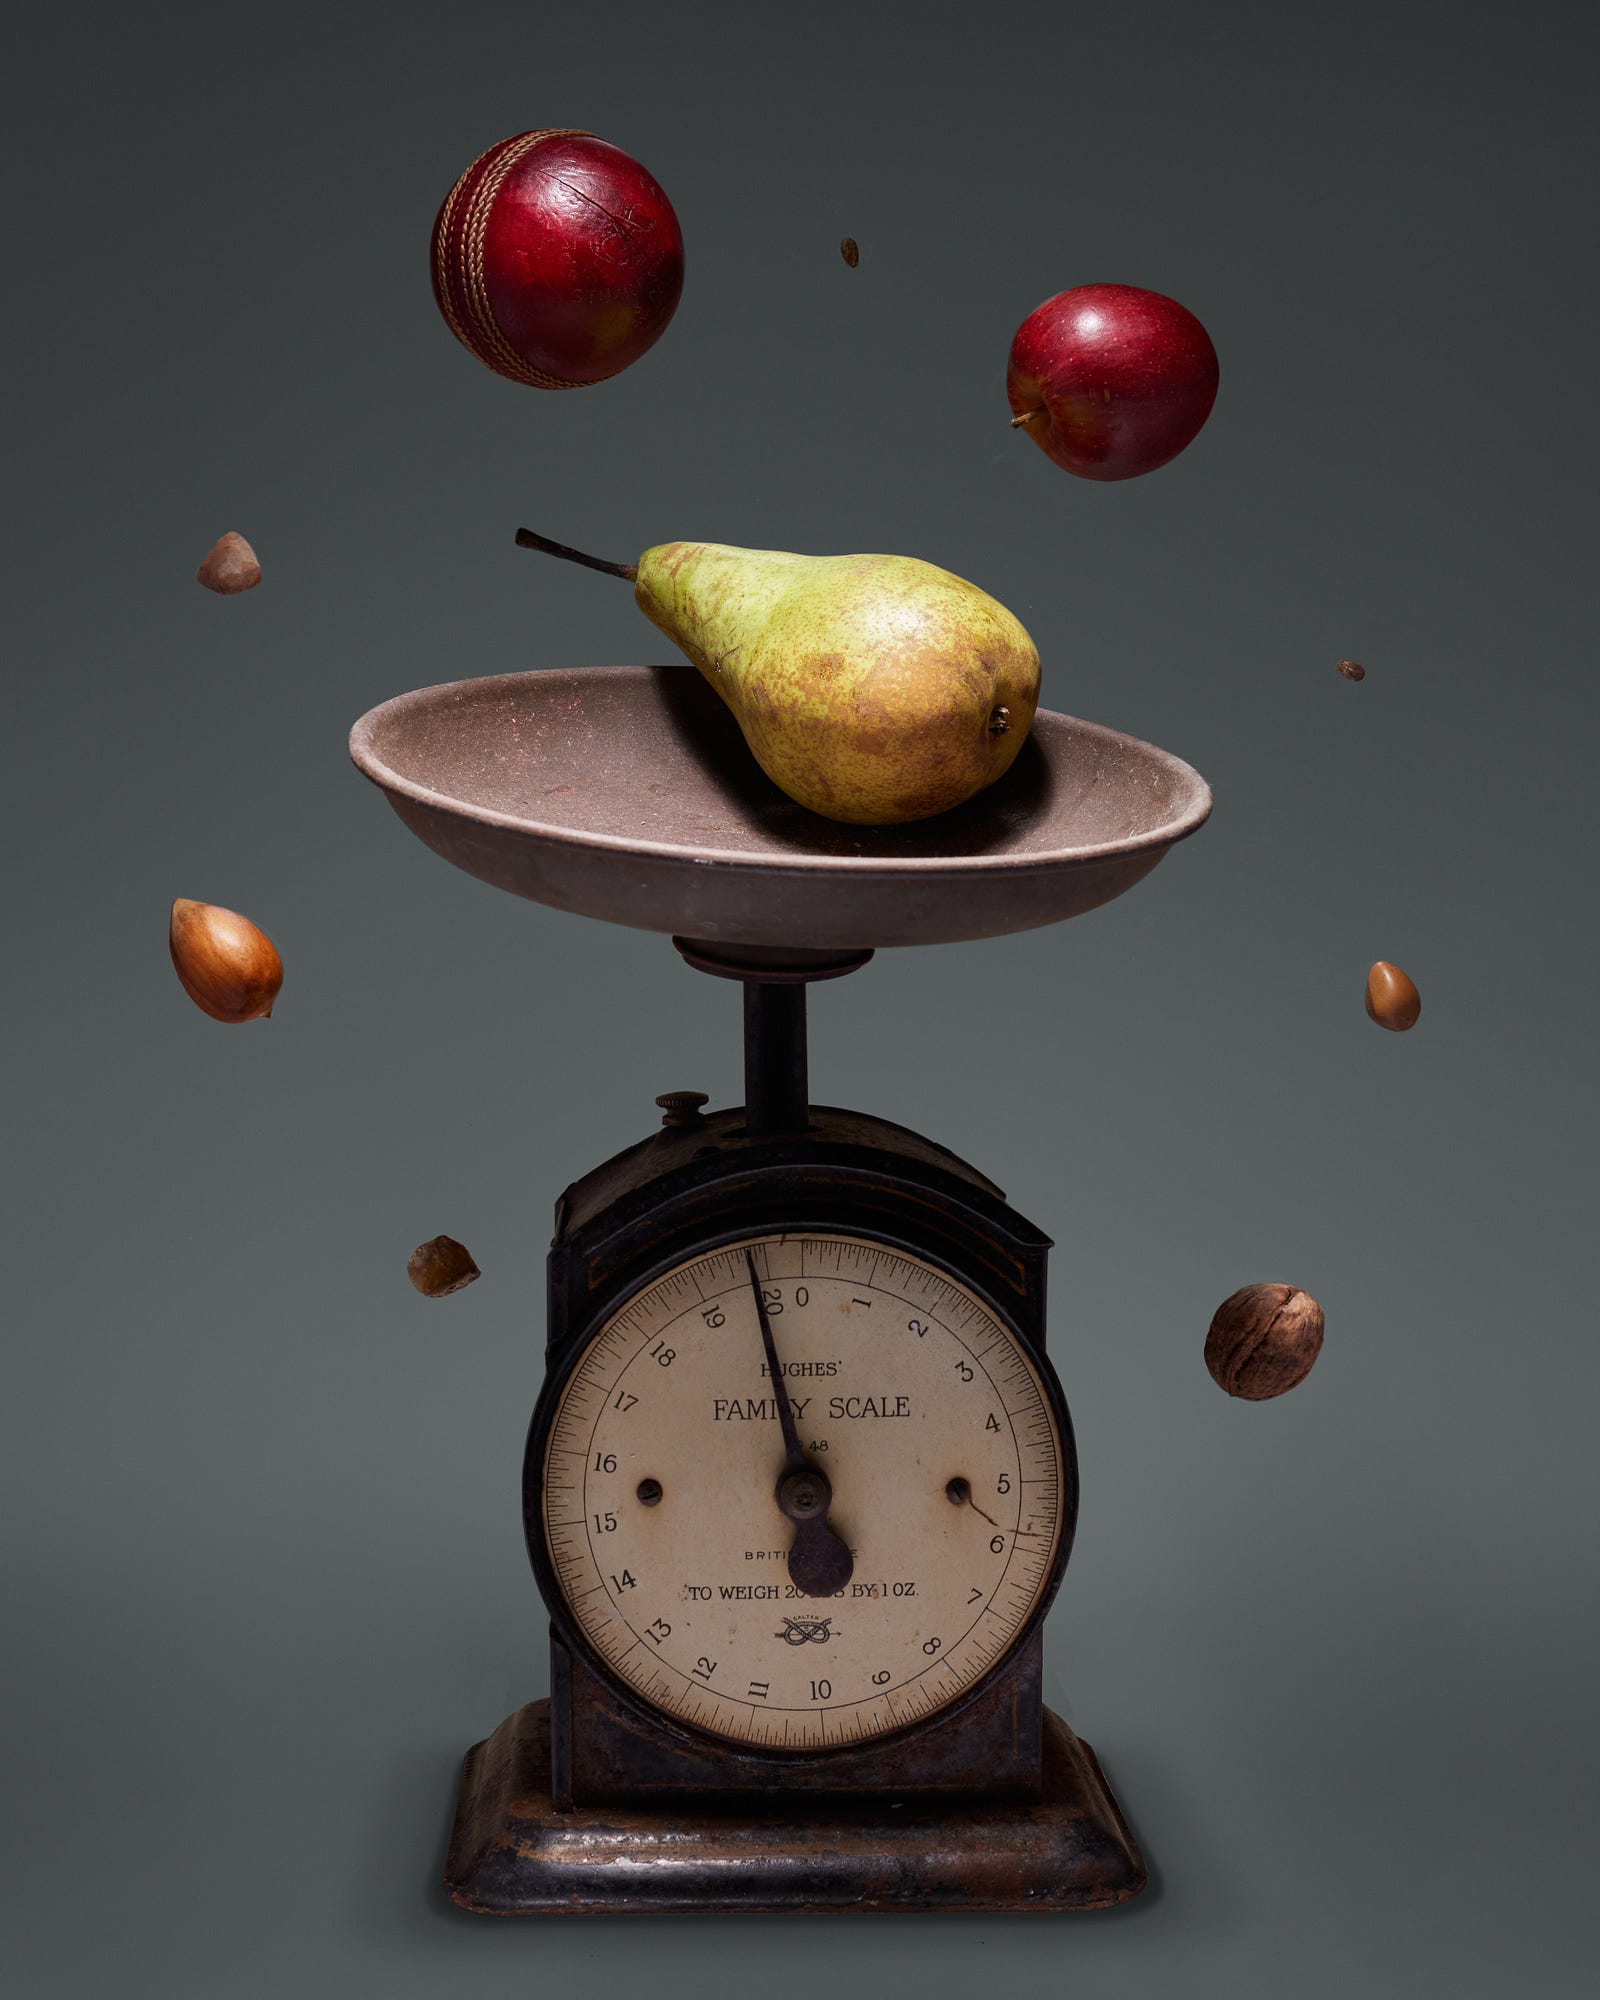 A pear sits on an old-fashioned scale. Dietary or calorie restriction (DR, CR) is reduced food intake without malnutrition.